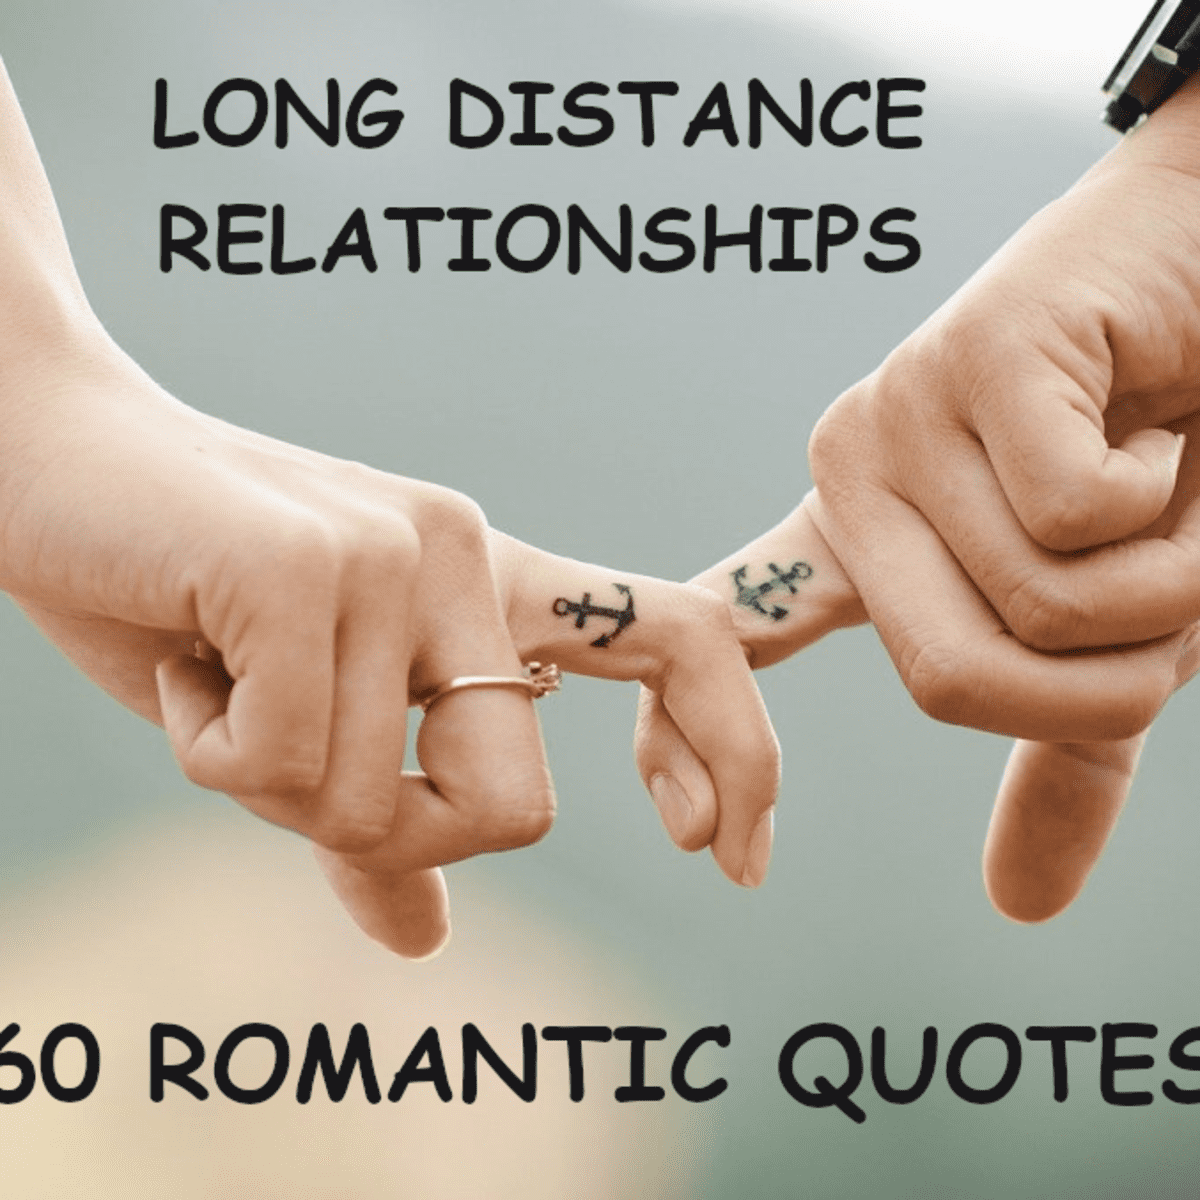 60 Long Distance Relationship Quotes - PairedLife